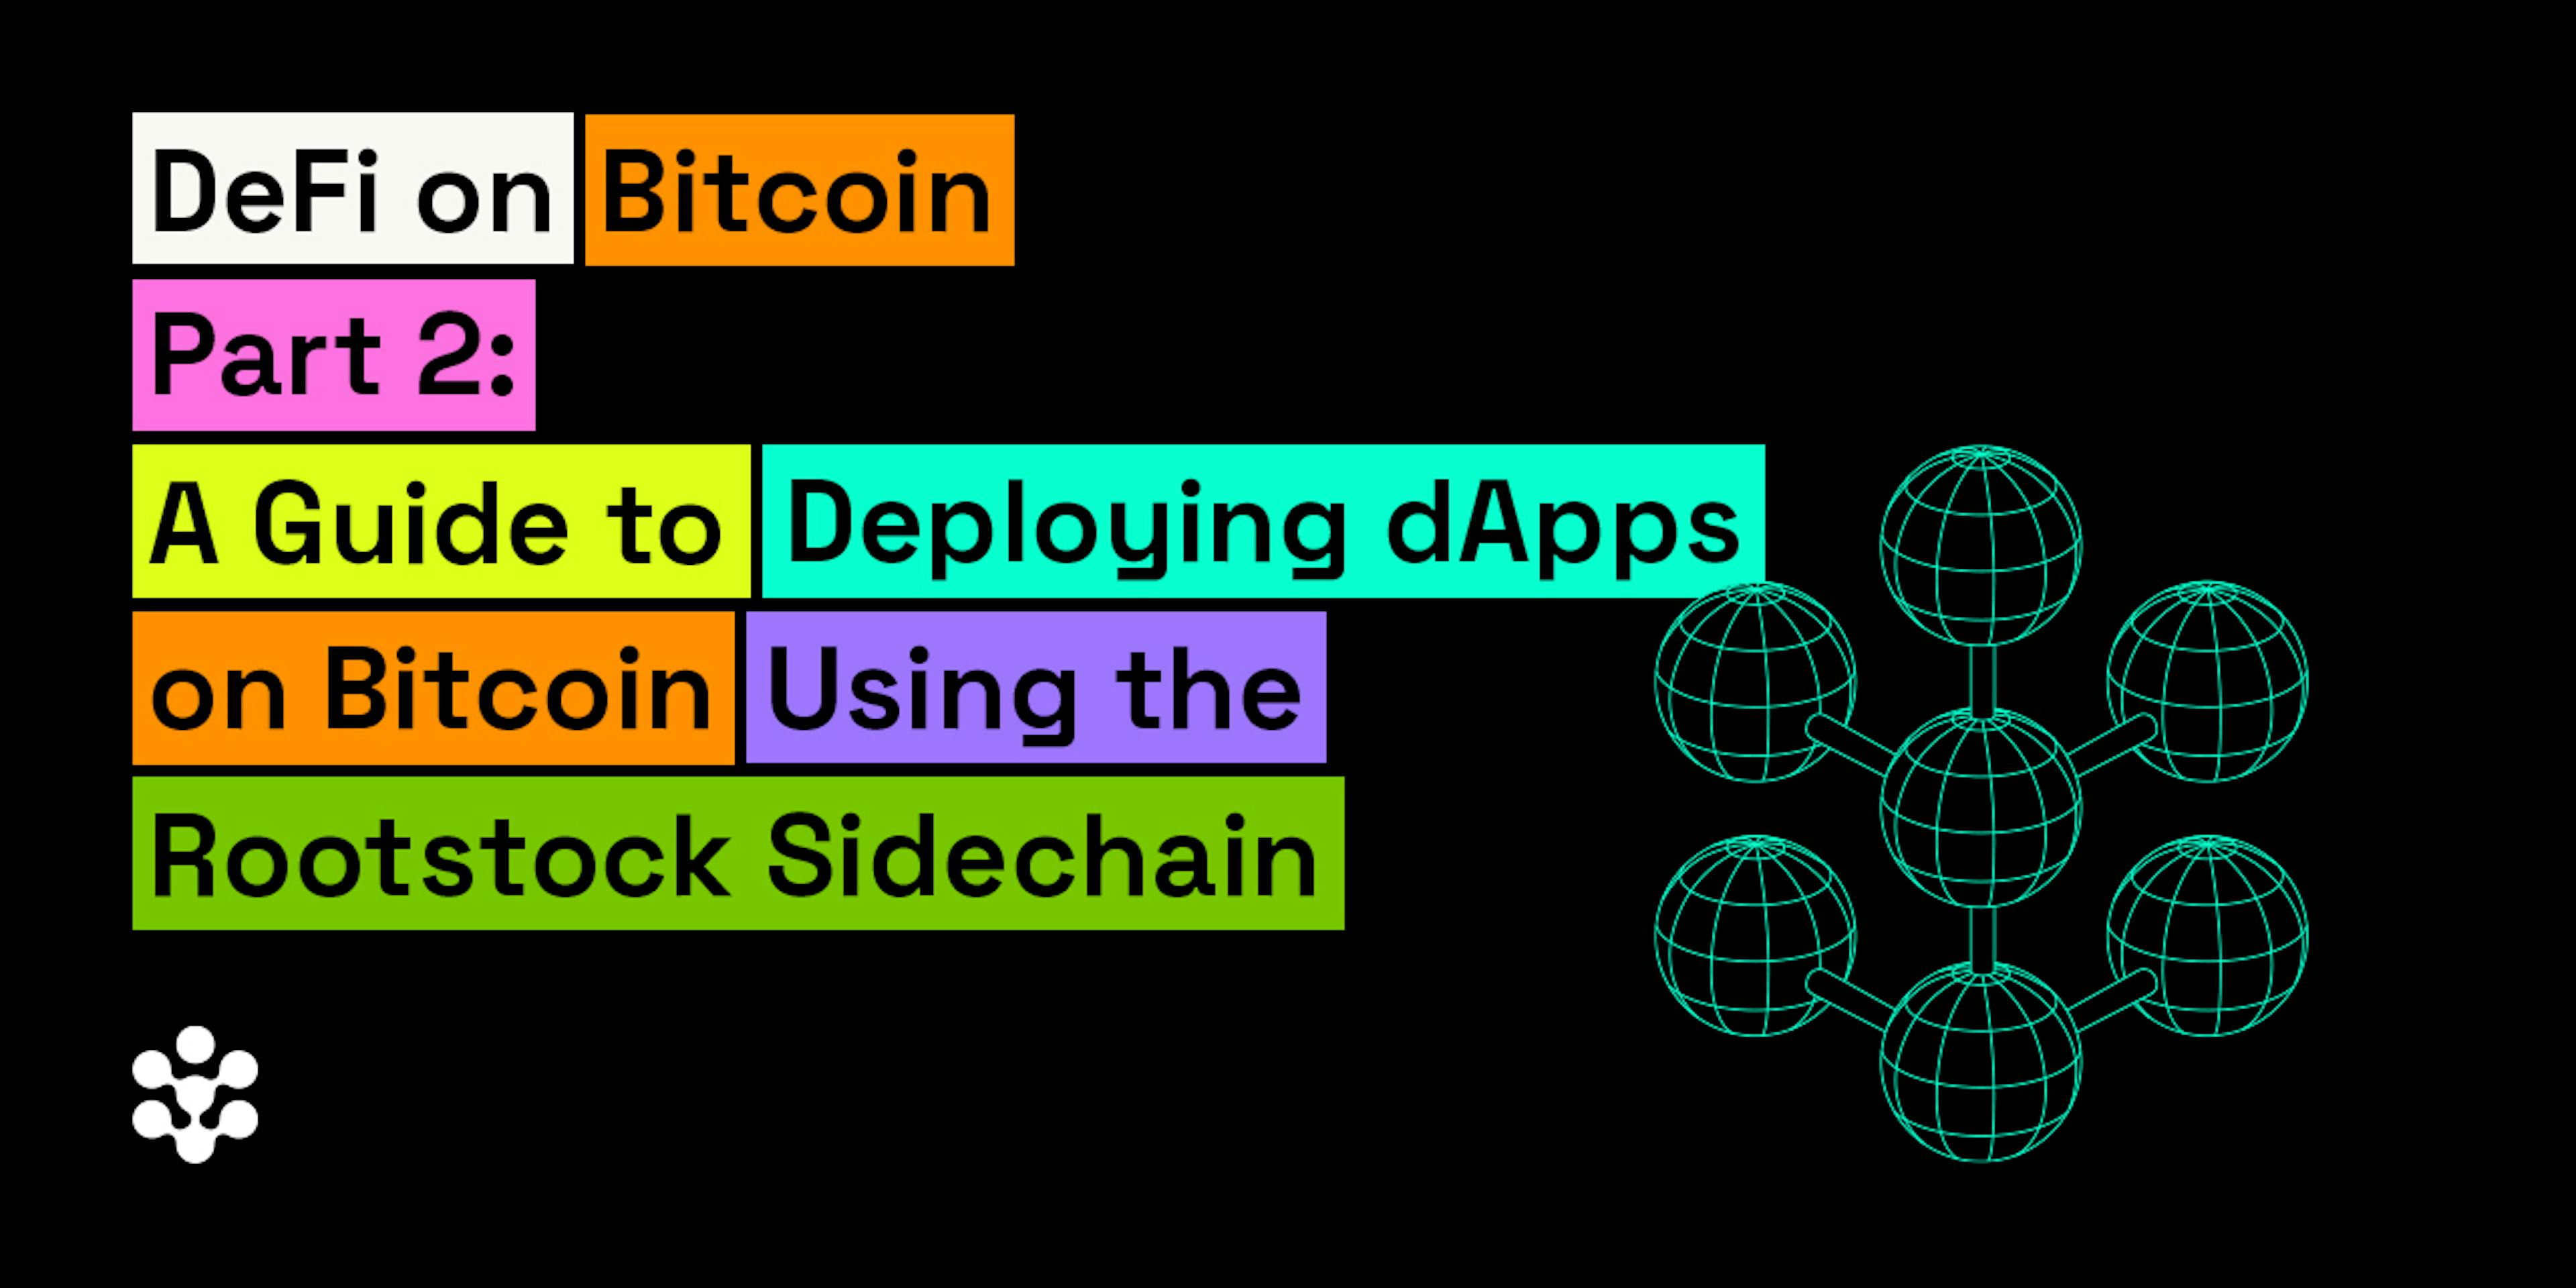 featured image - DeFi on Bitcoin Part 2: How to Deploy DApps on Bitcoin Using the Rootstock Sidechain